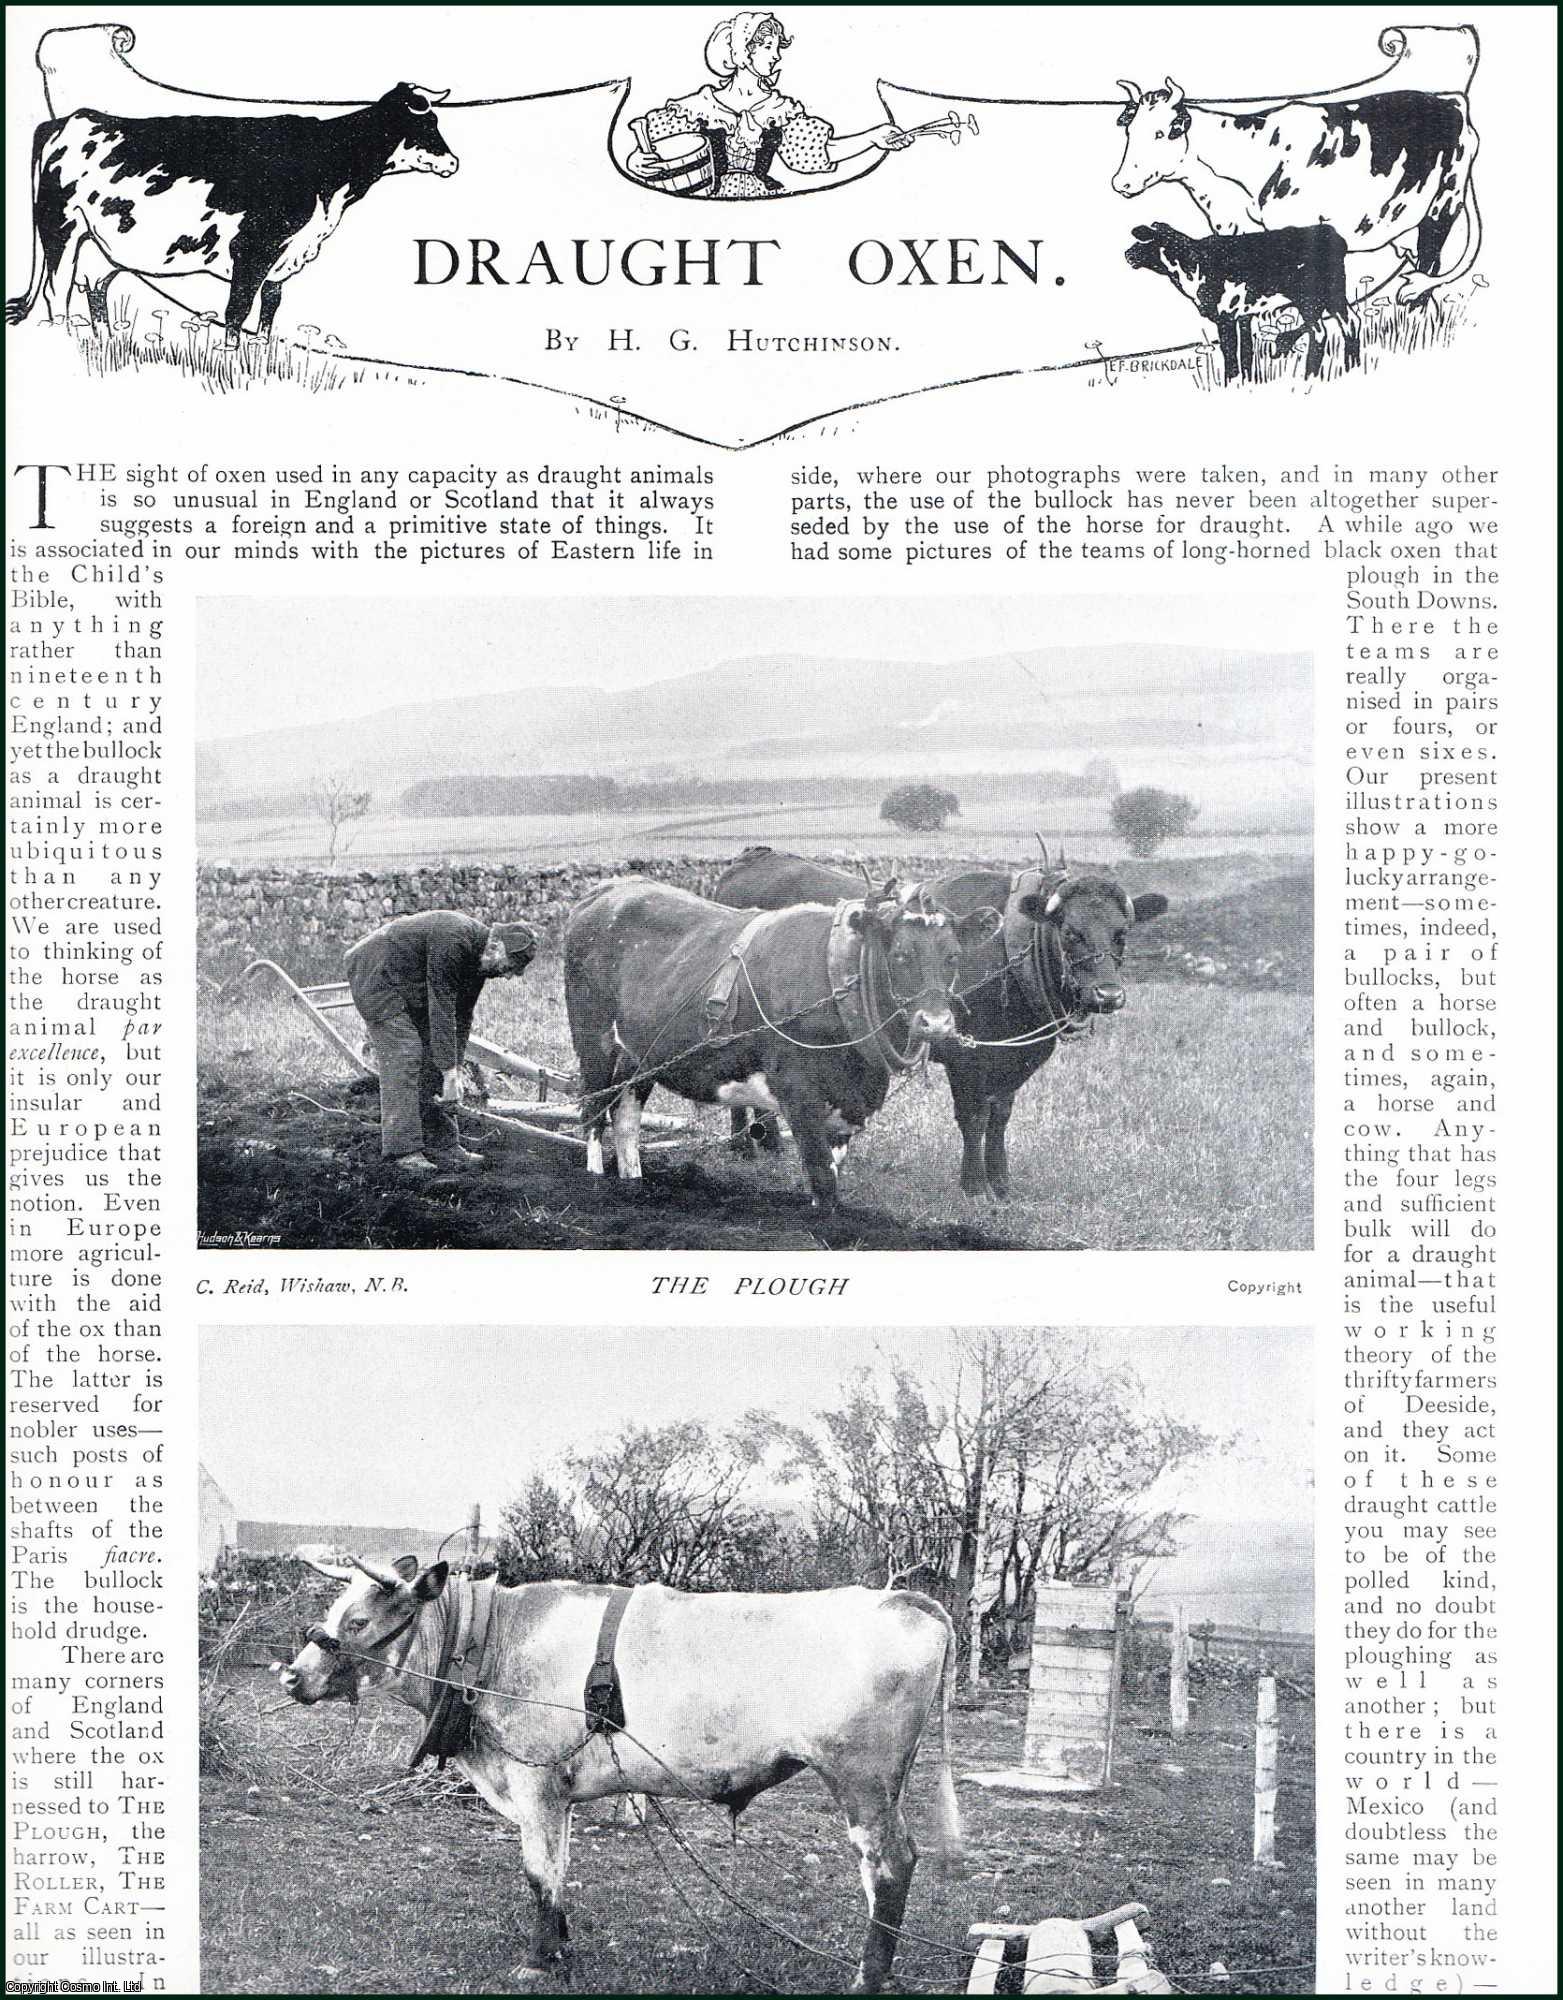 H.G. Hutchinson - Draught Oxen used to Aid in Work or Labor. Several pictures and accompanying text, removed from an original issue of Country Life Magazine, 1899.